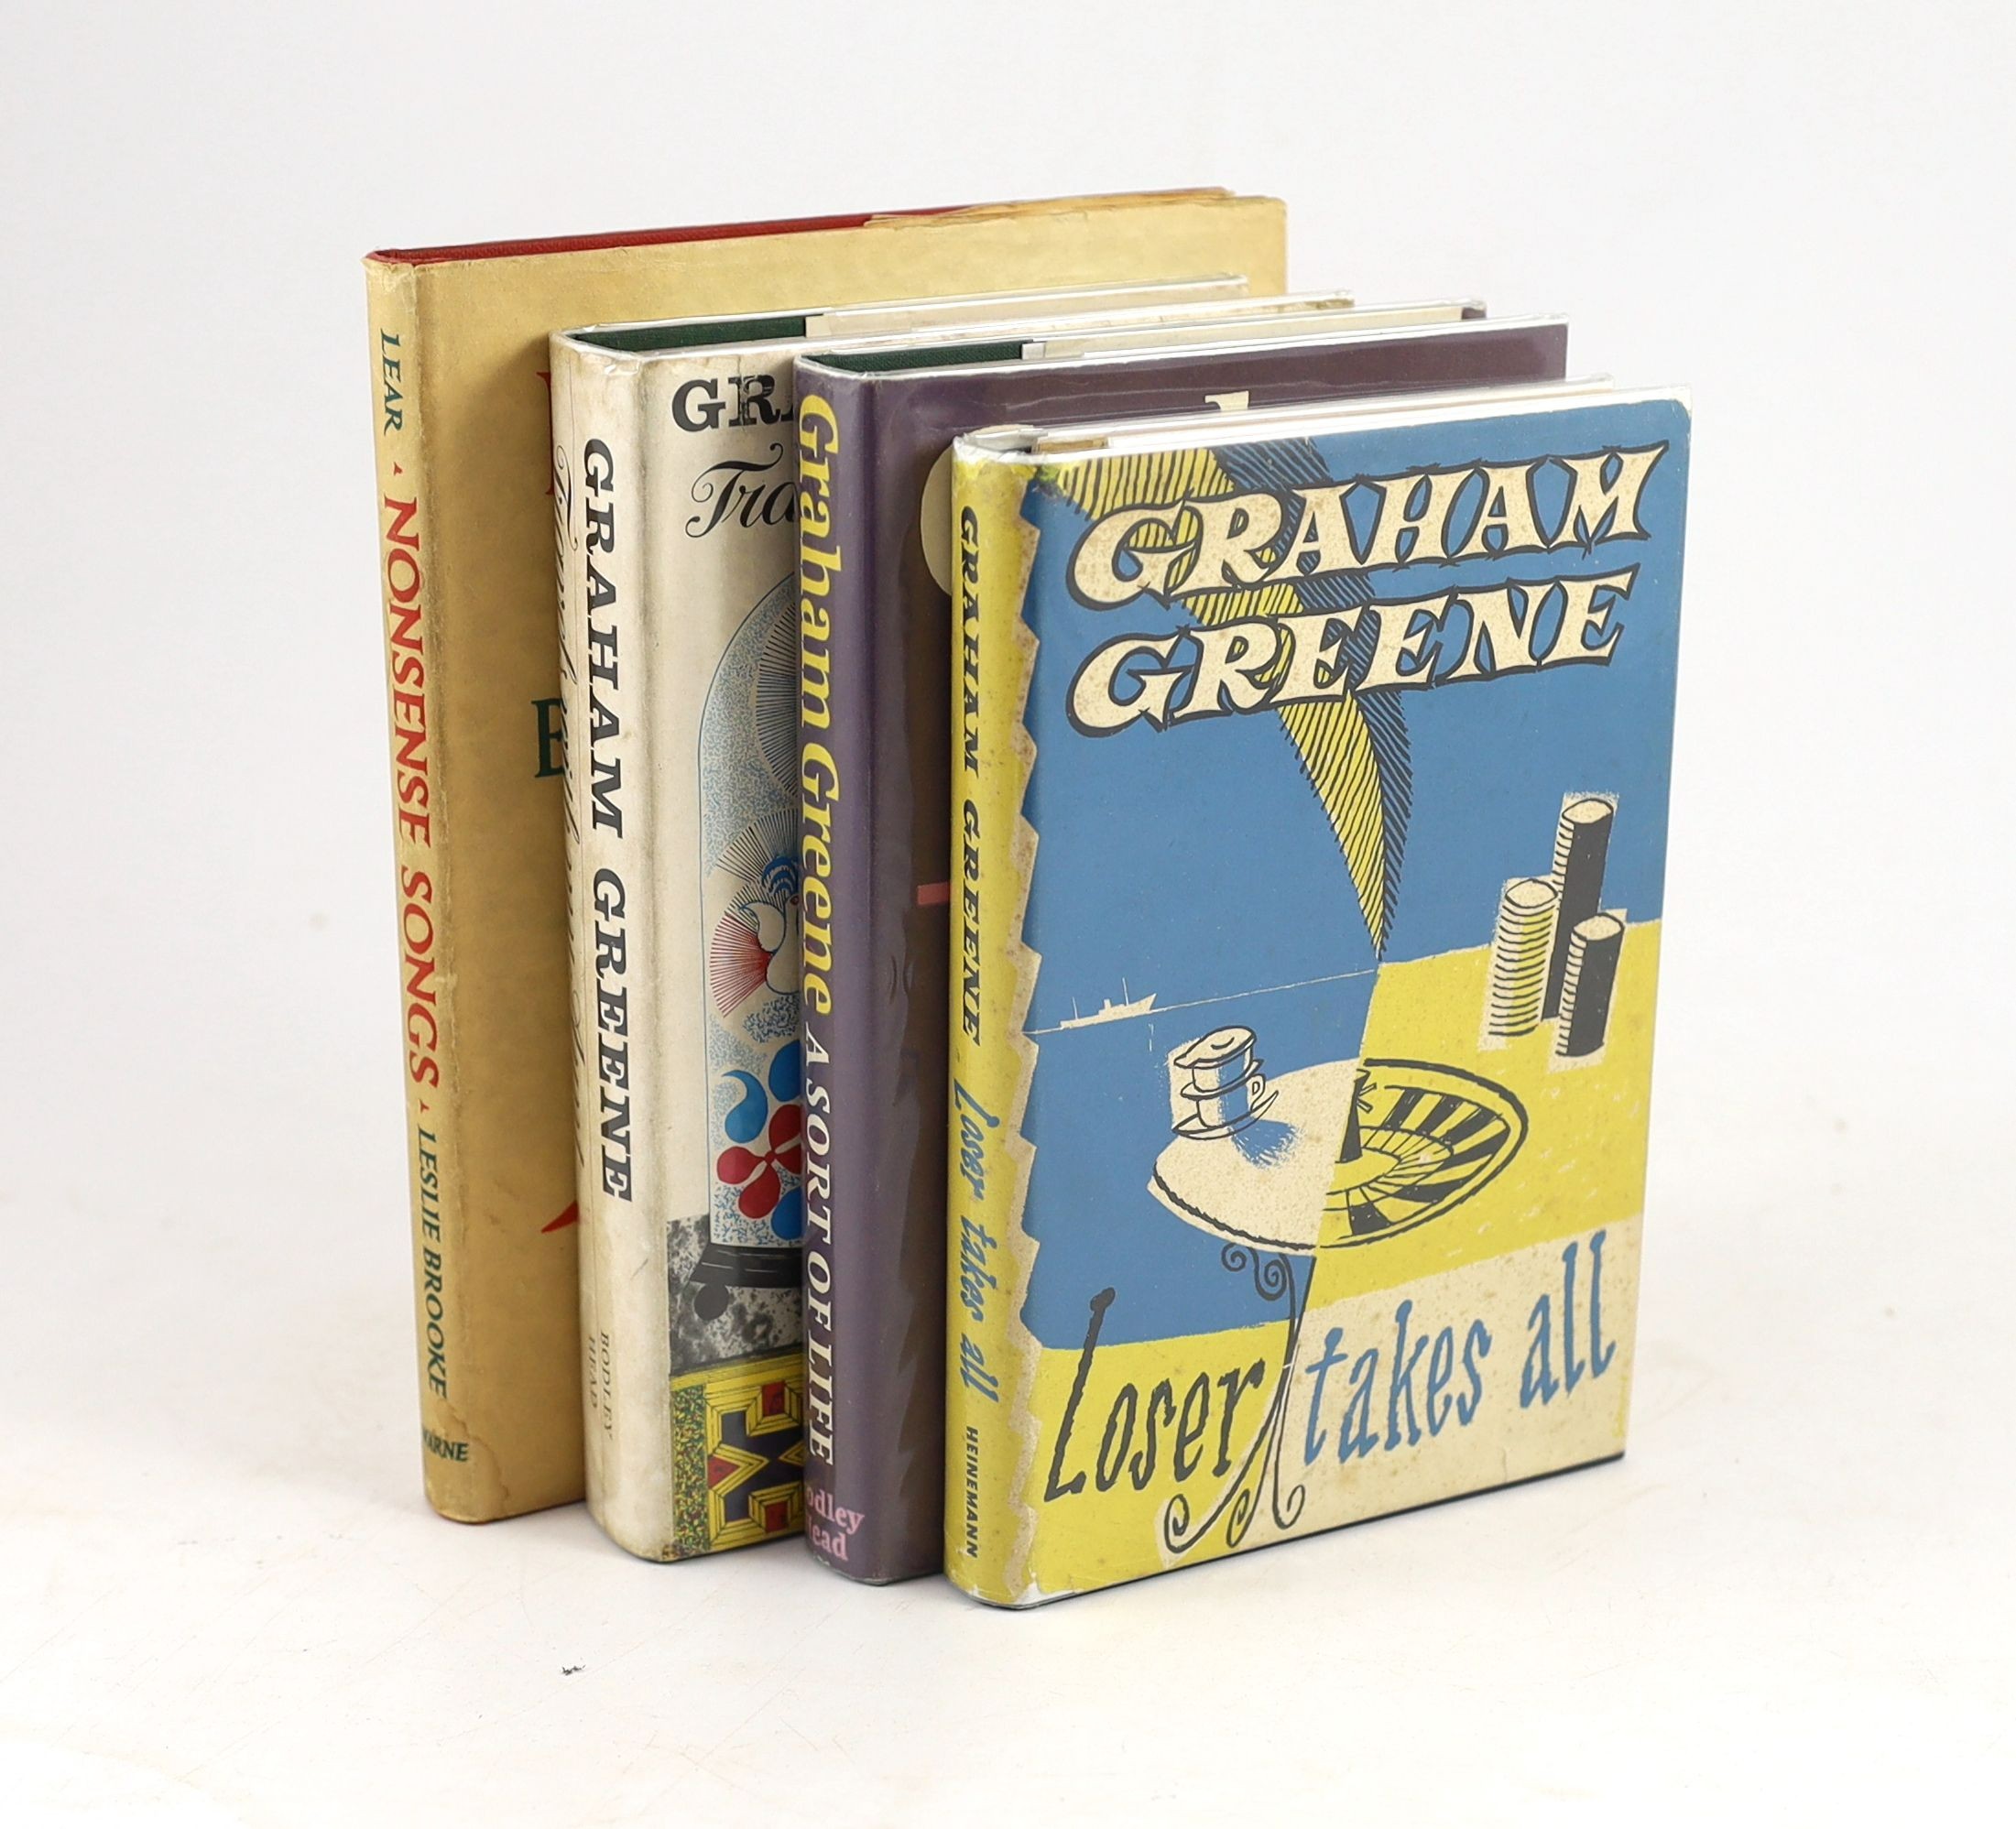 Greene, Graham - 3 works - A Sort of Life. 1st ed. original cloth with clipped d/j. 8vo. The Bodley Head, London, 1971; Travels with my Aunt. 1st ed. original cloth and unclipped d/j. 8vo. The Bodley Head, London, 1969;